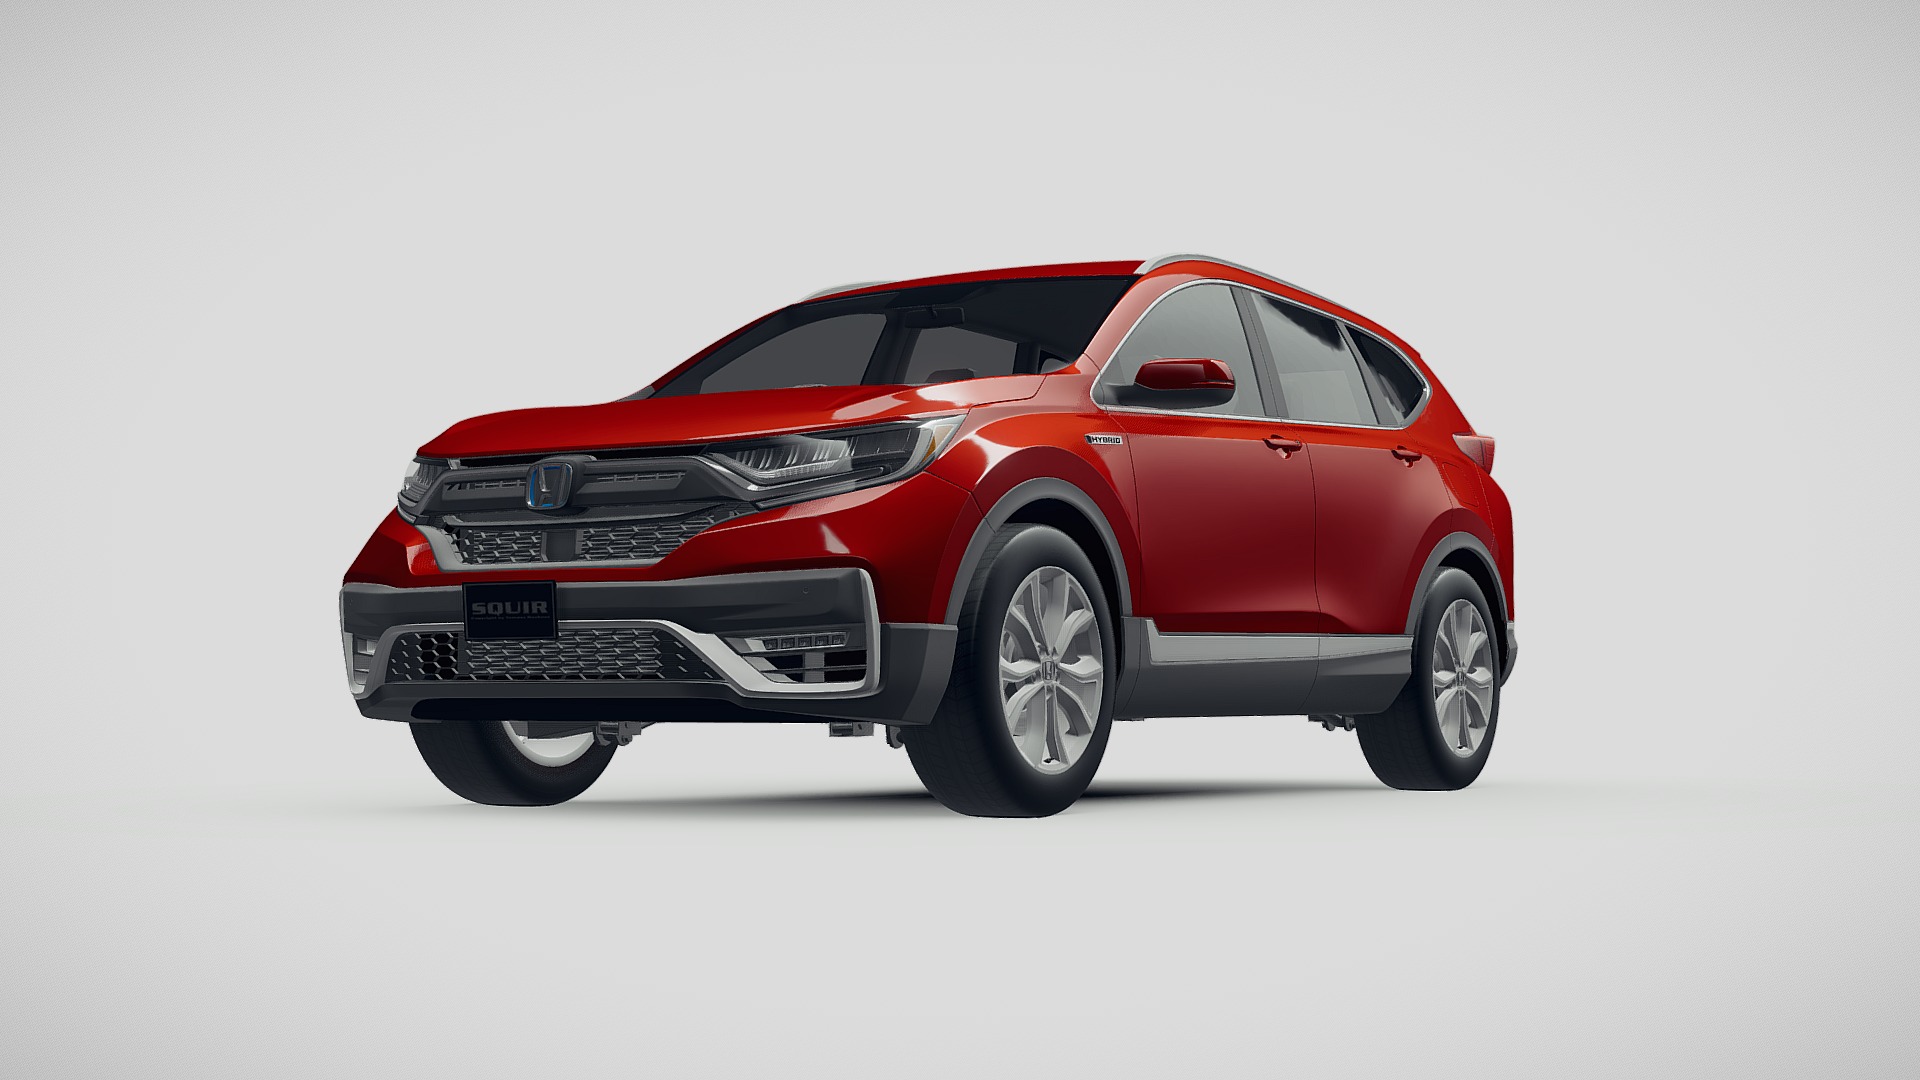 3D model Honda CR-V 2020 - This is a 3D model of the Honda CR-V 2020. The 3D model is about a red car with a white background.